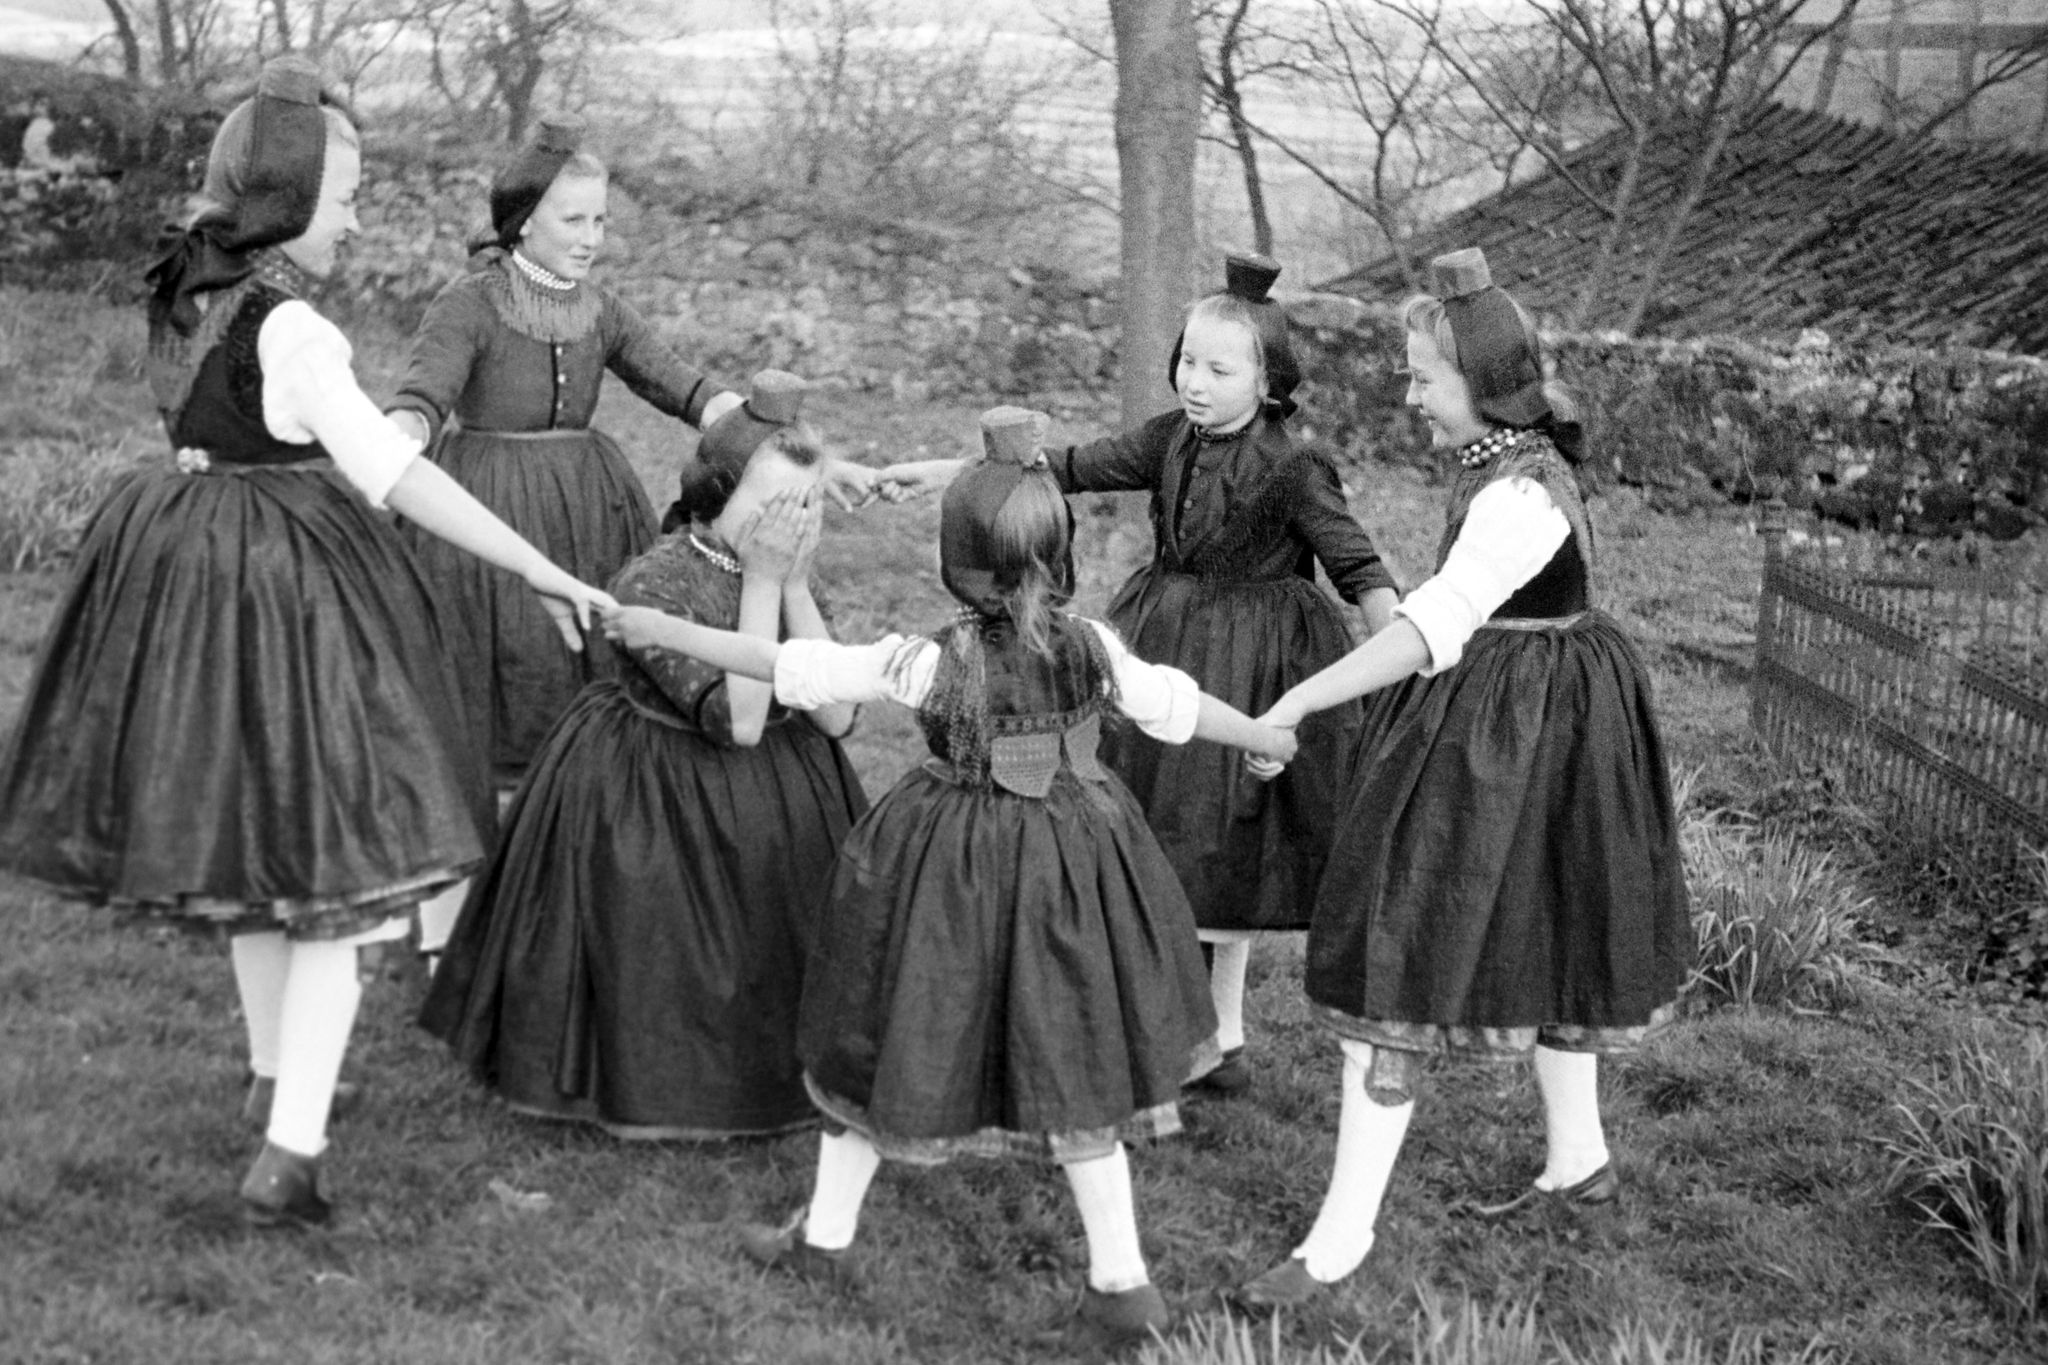 traditionally dancing girls of the village youth in traditional costumes on the schwalm near holzburg during a bunny game hasenspiel, chosen by edward steichen for the moma travelling exhibition of 1955 the family of man, germany 1938 photo by erich andresunited images via getty images